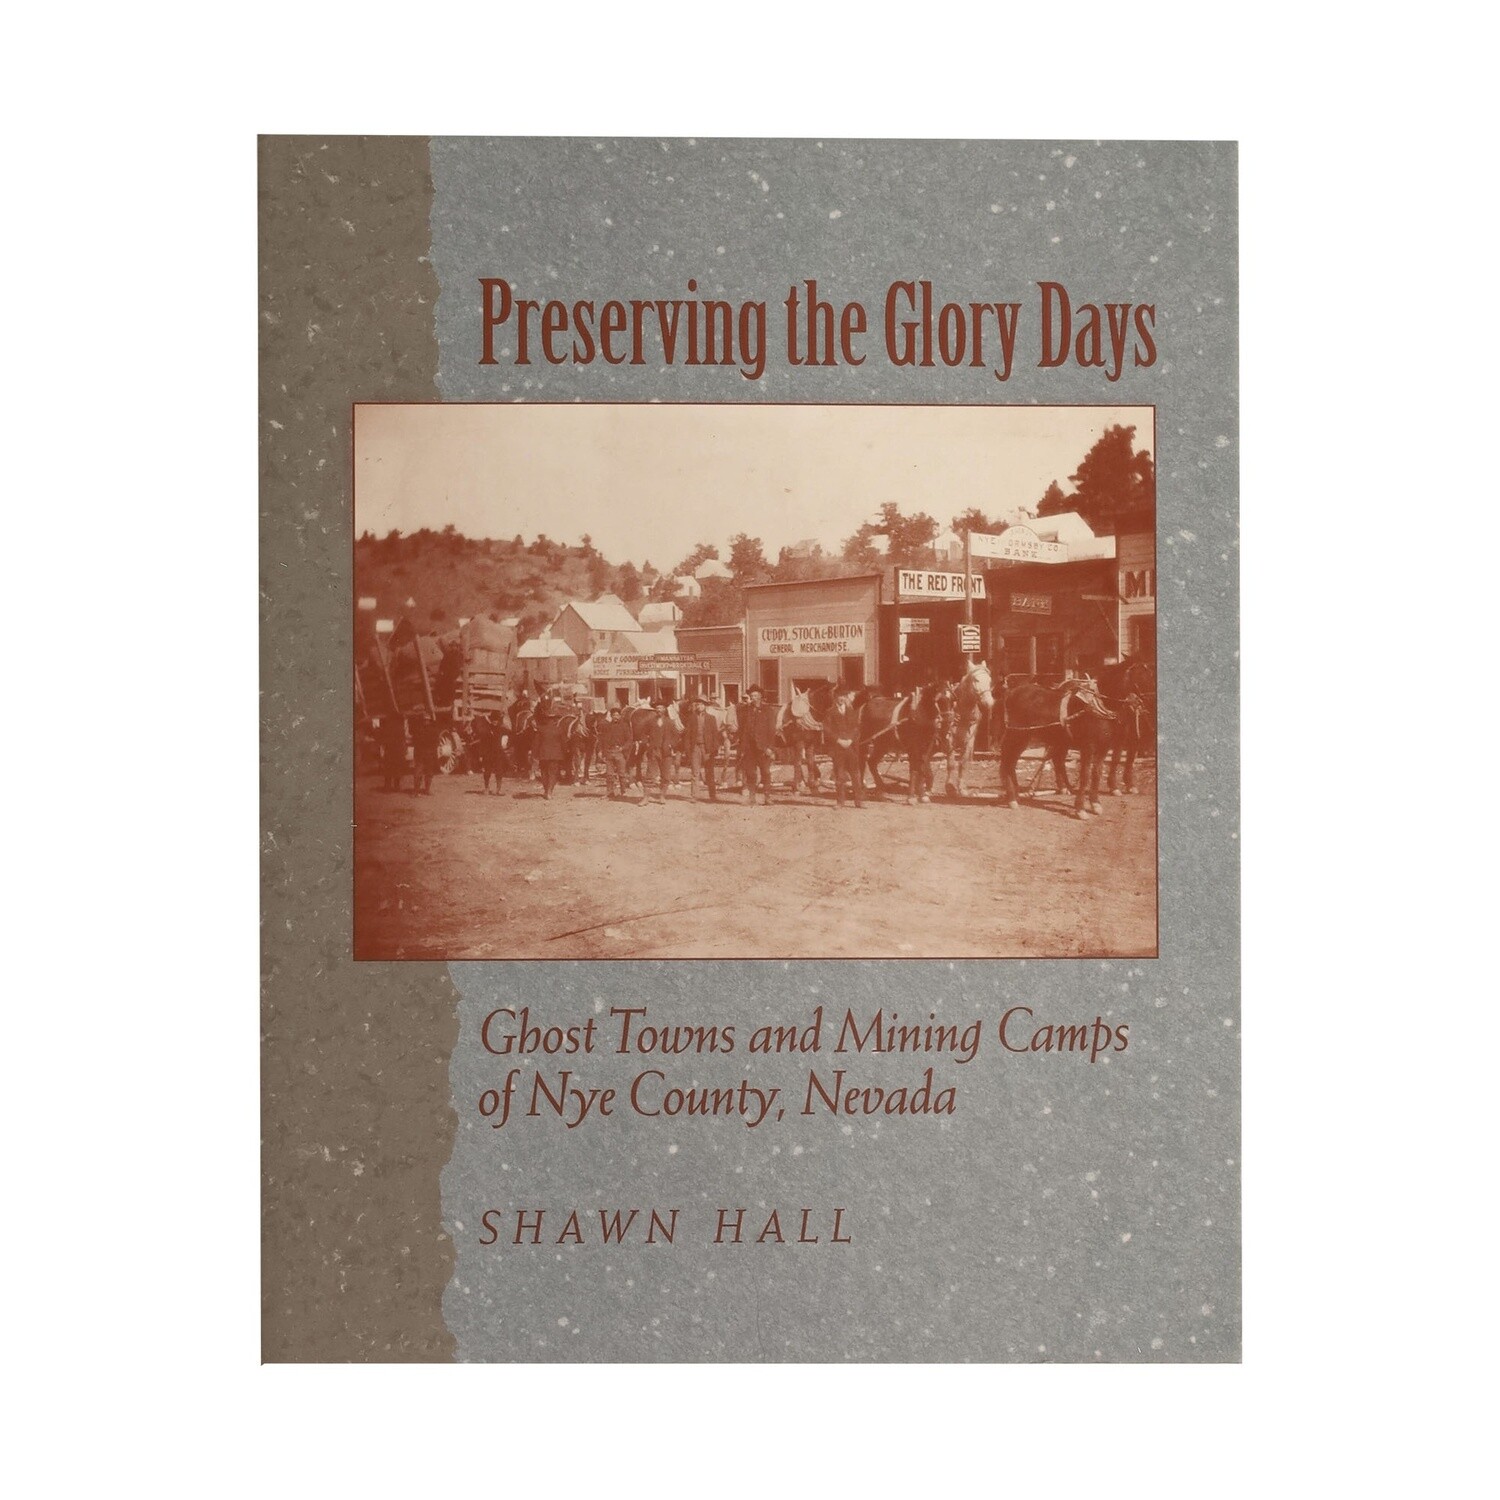 Preserving the Glory Days by Shawn Hall